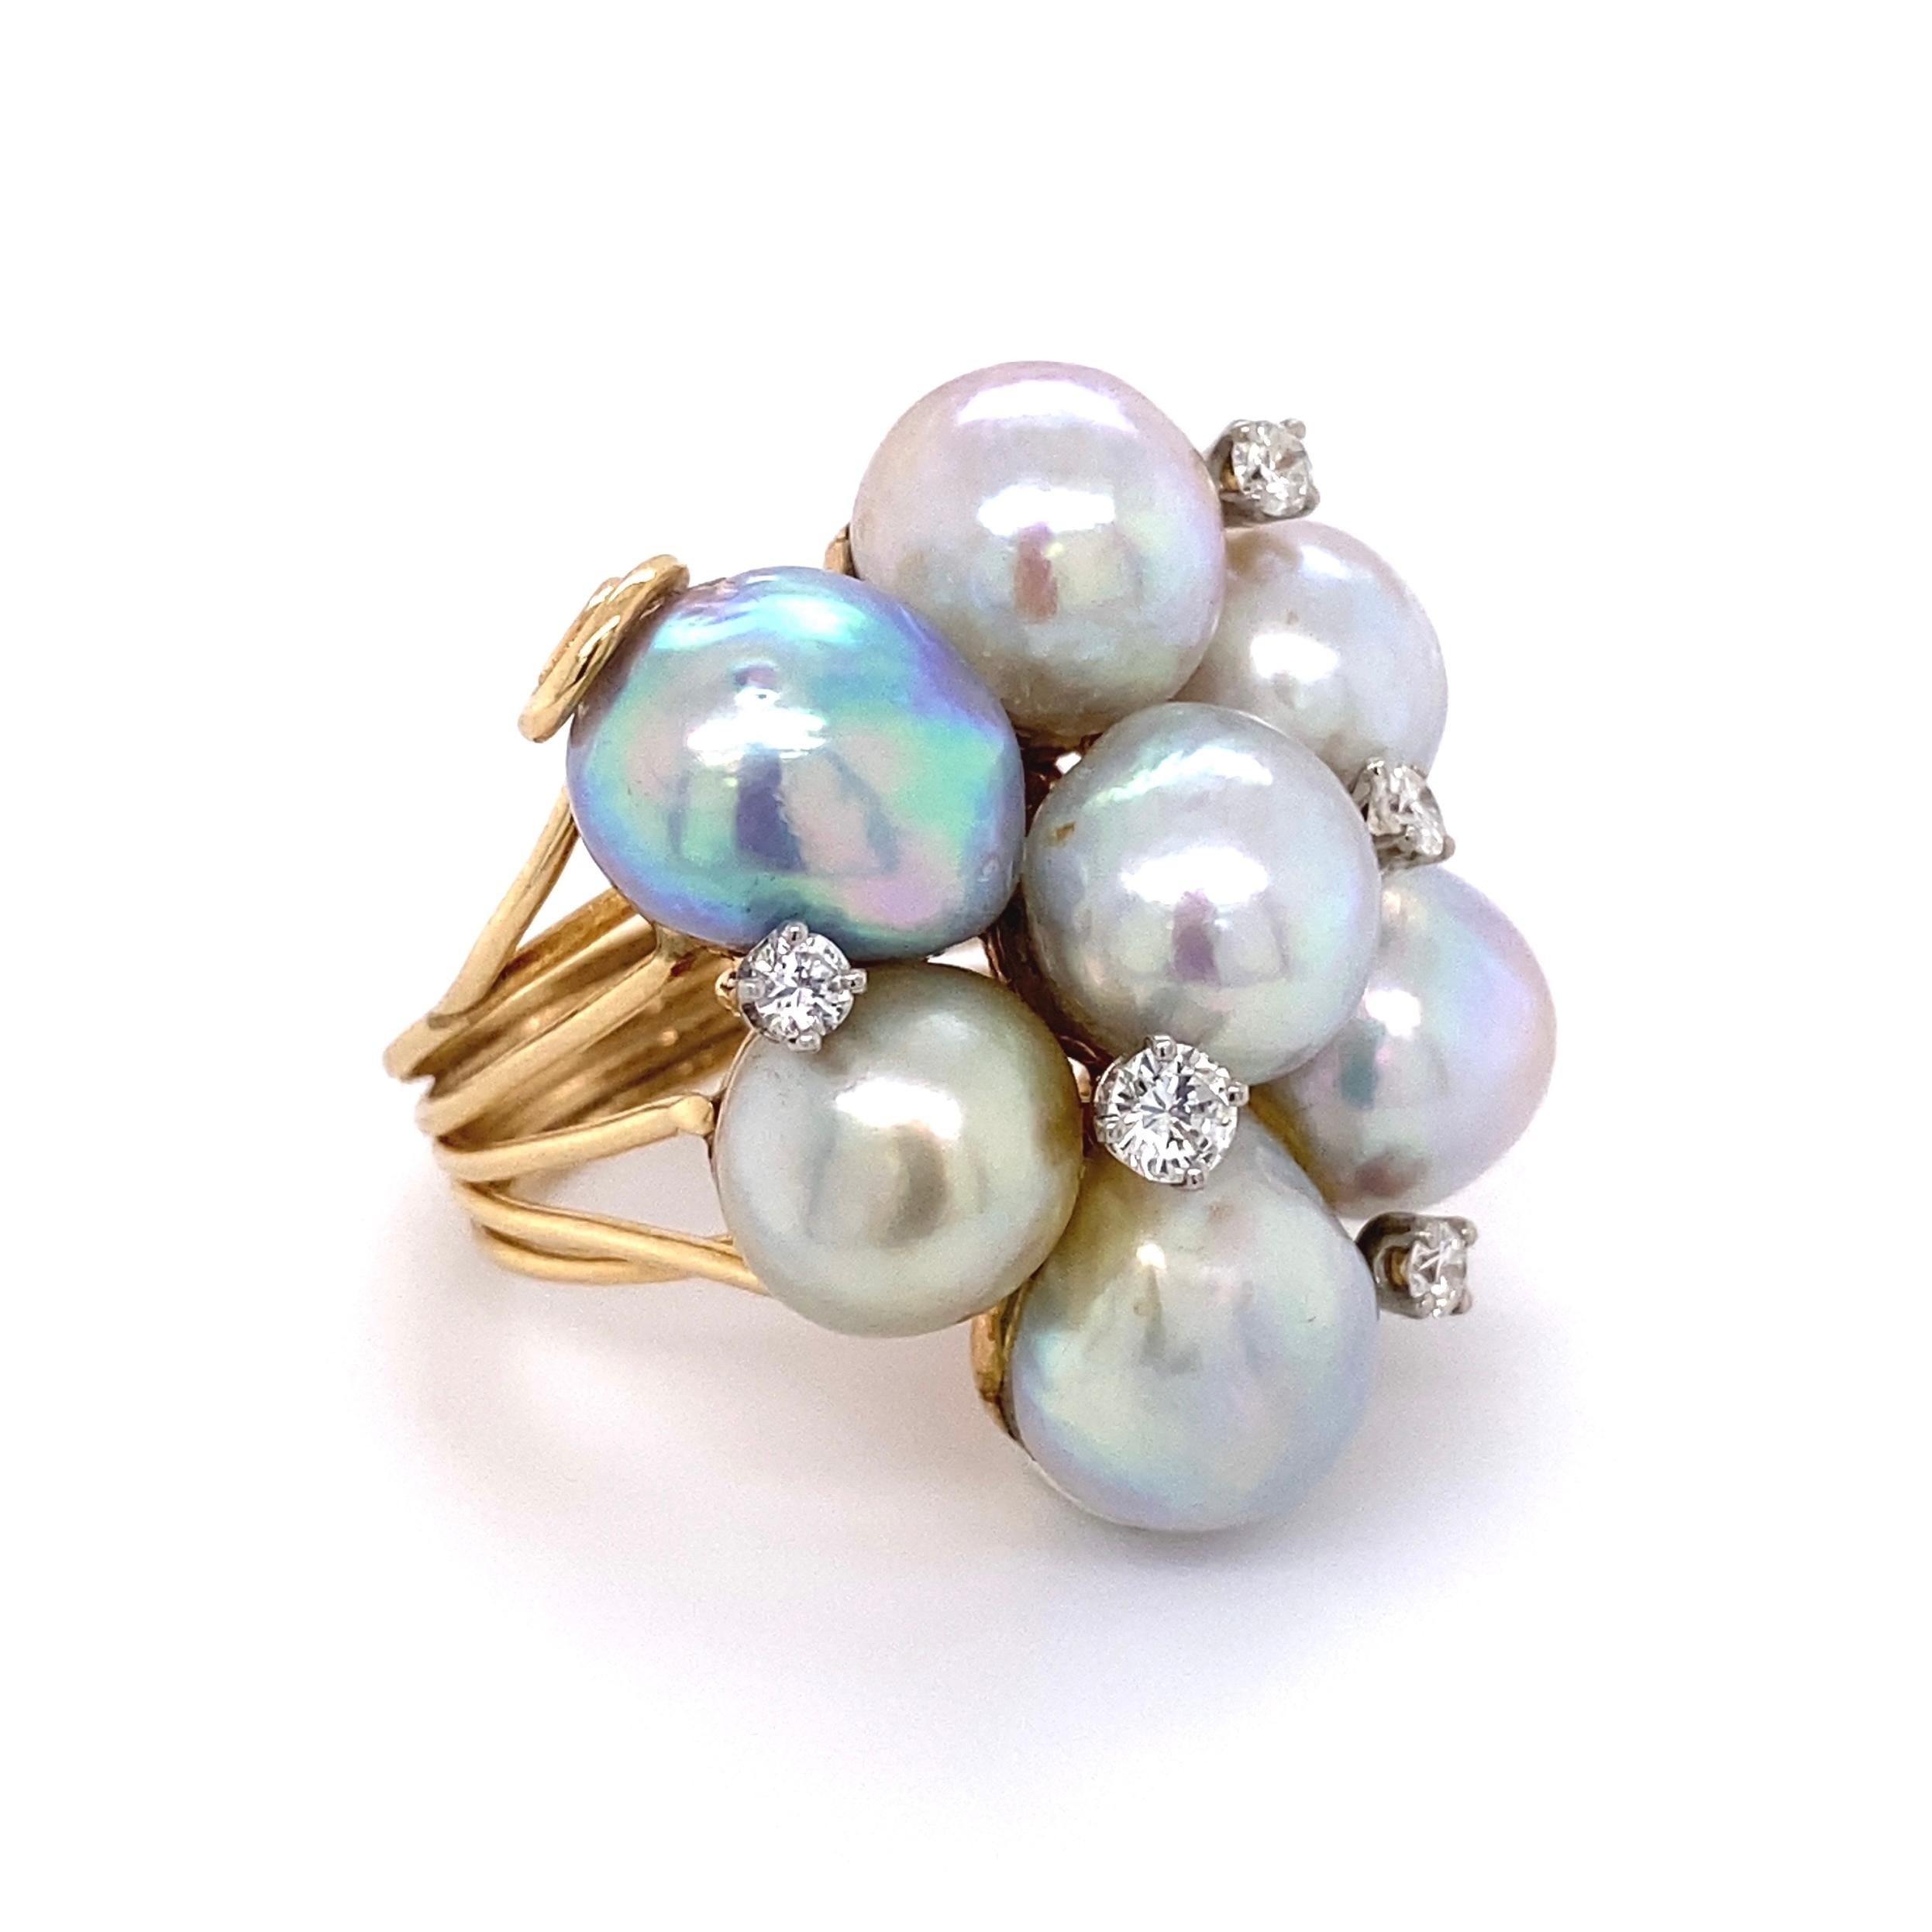 Brilliant Cut Pearls and Diamonds Modernist Gold Cocktail Cluster Ring Estate Fine Jewelry